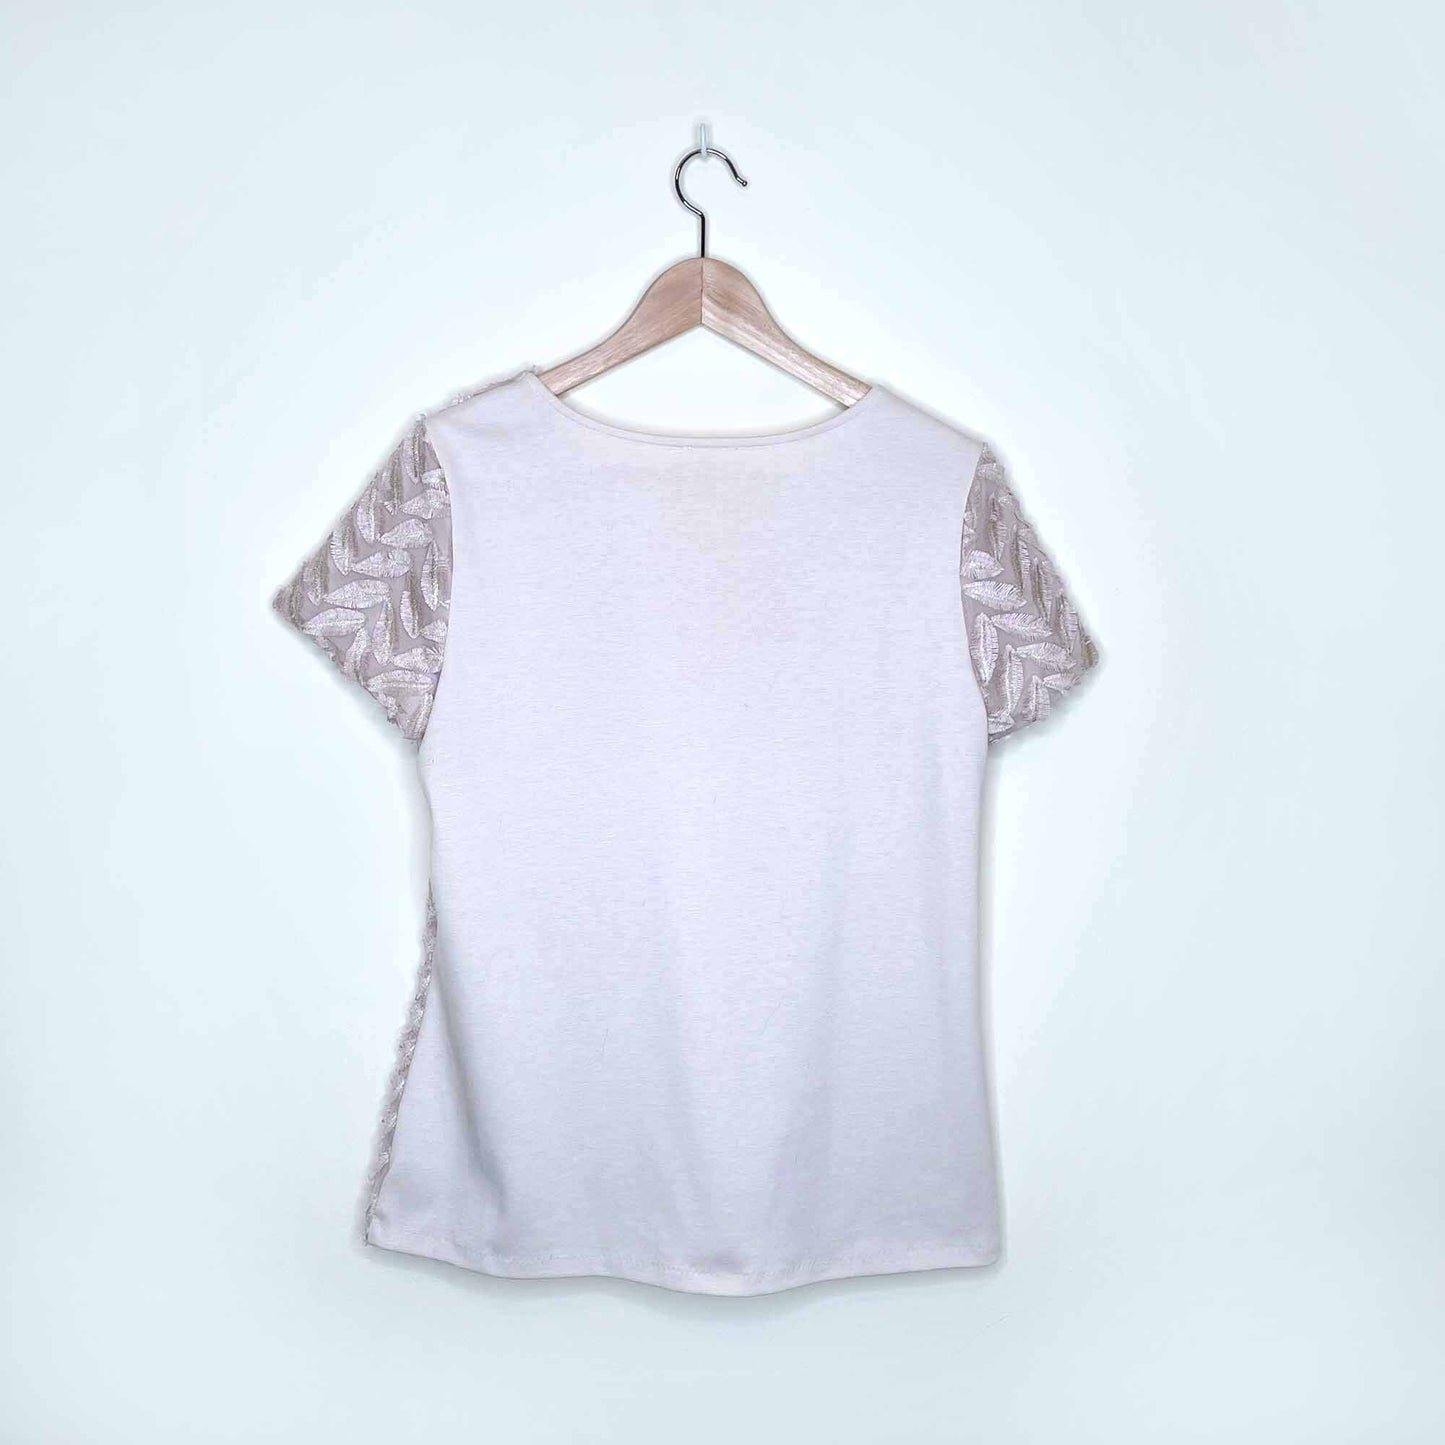 anthropologie weston leaf embroidered top - size large